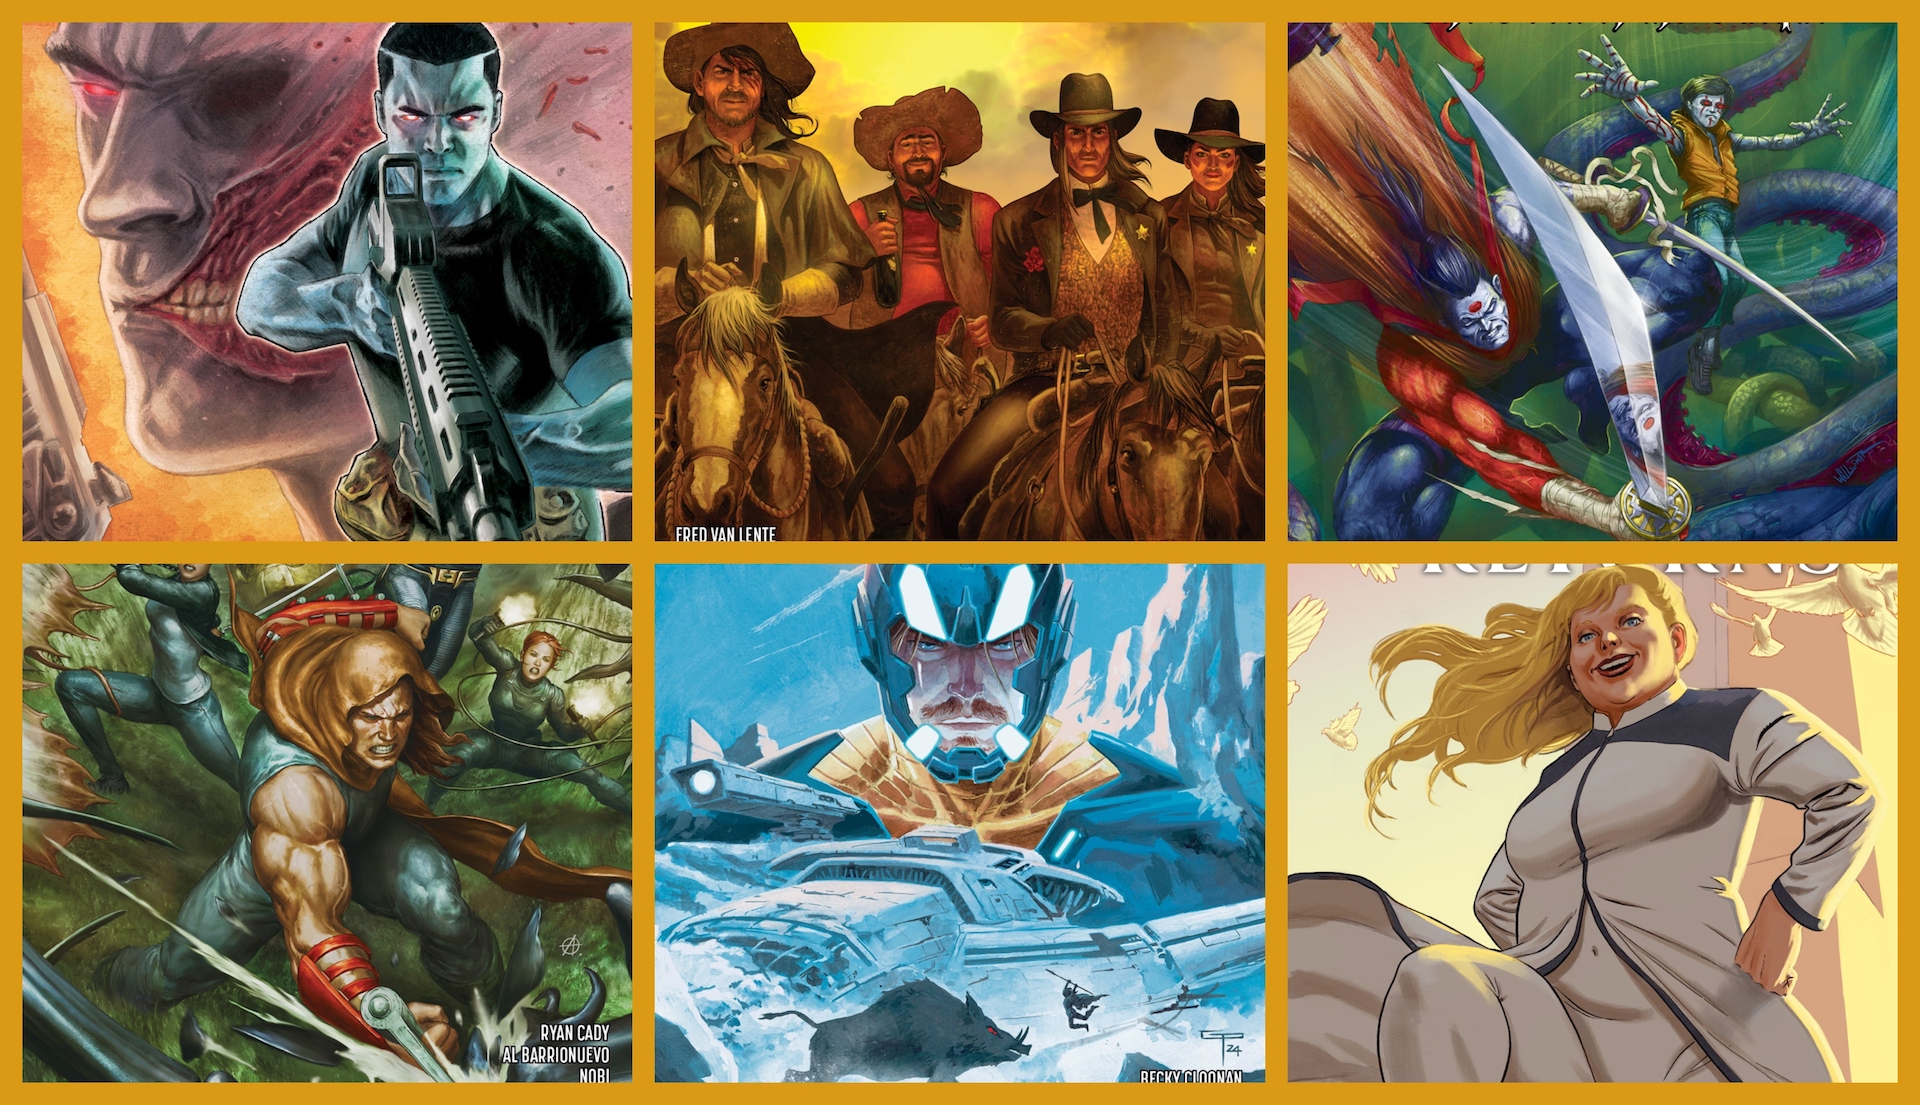 Check out previews for future Valiant 'Road to The Resurgence' titles